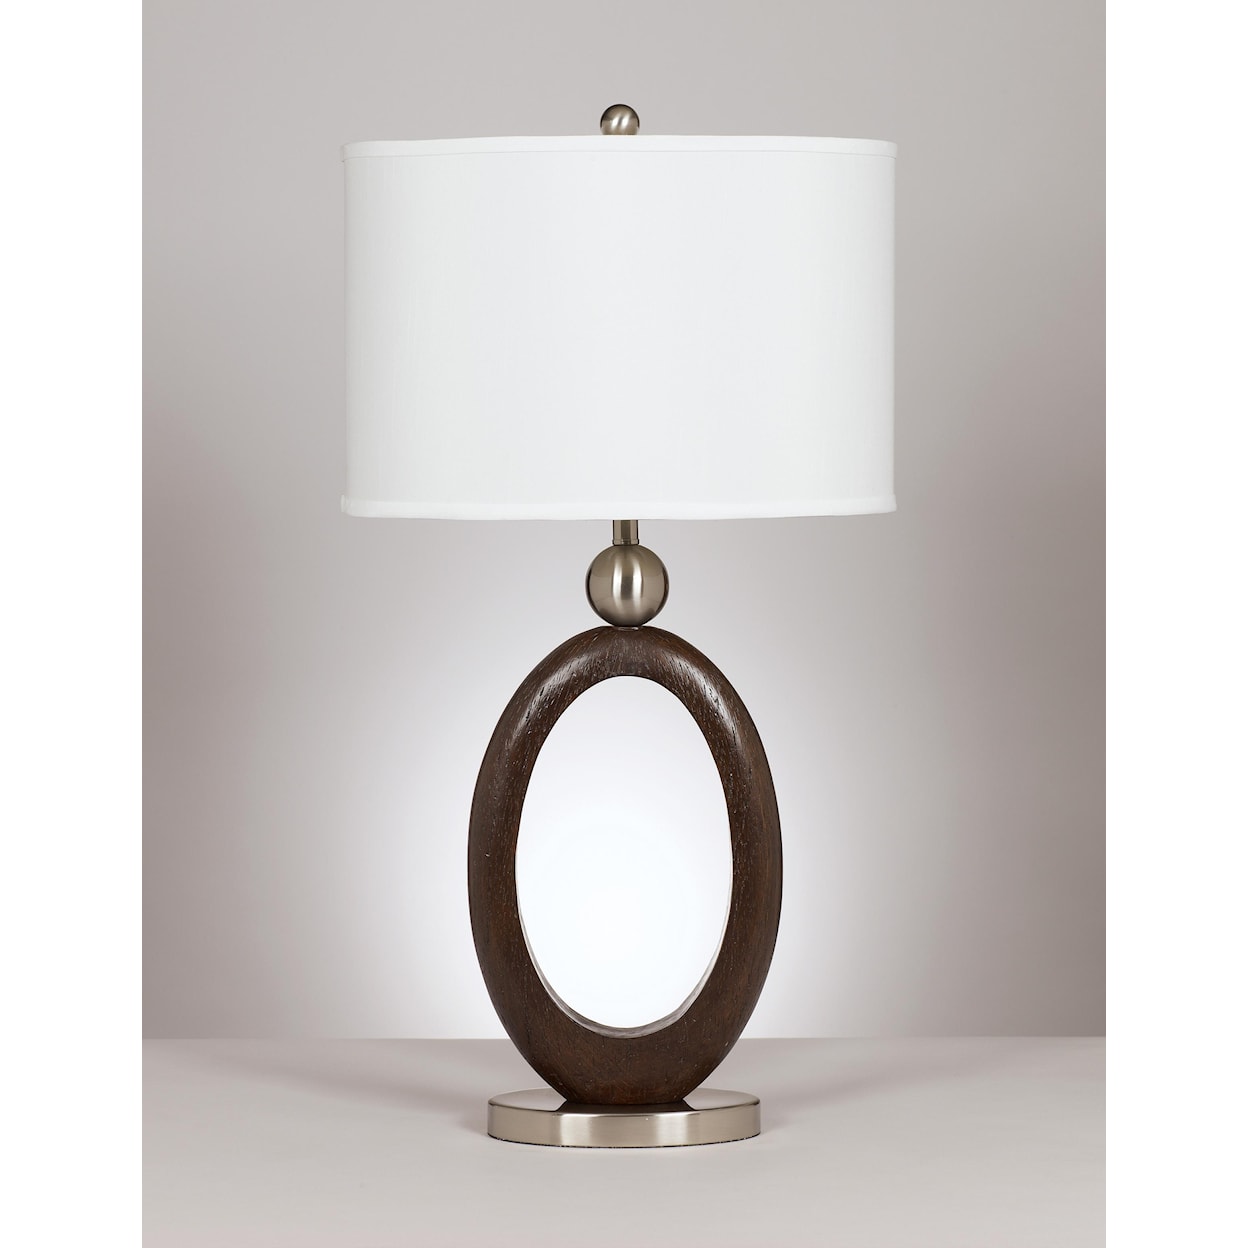 Signature Design by Ashley Lamps - Metro Modern Set of 2 Meckenzie Table Lamps